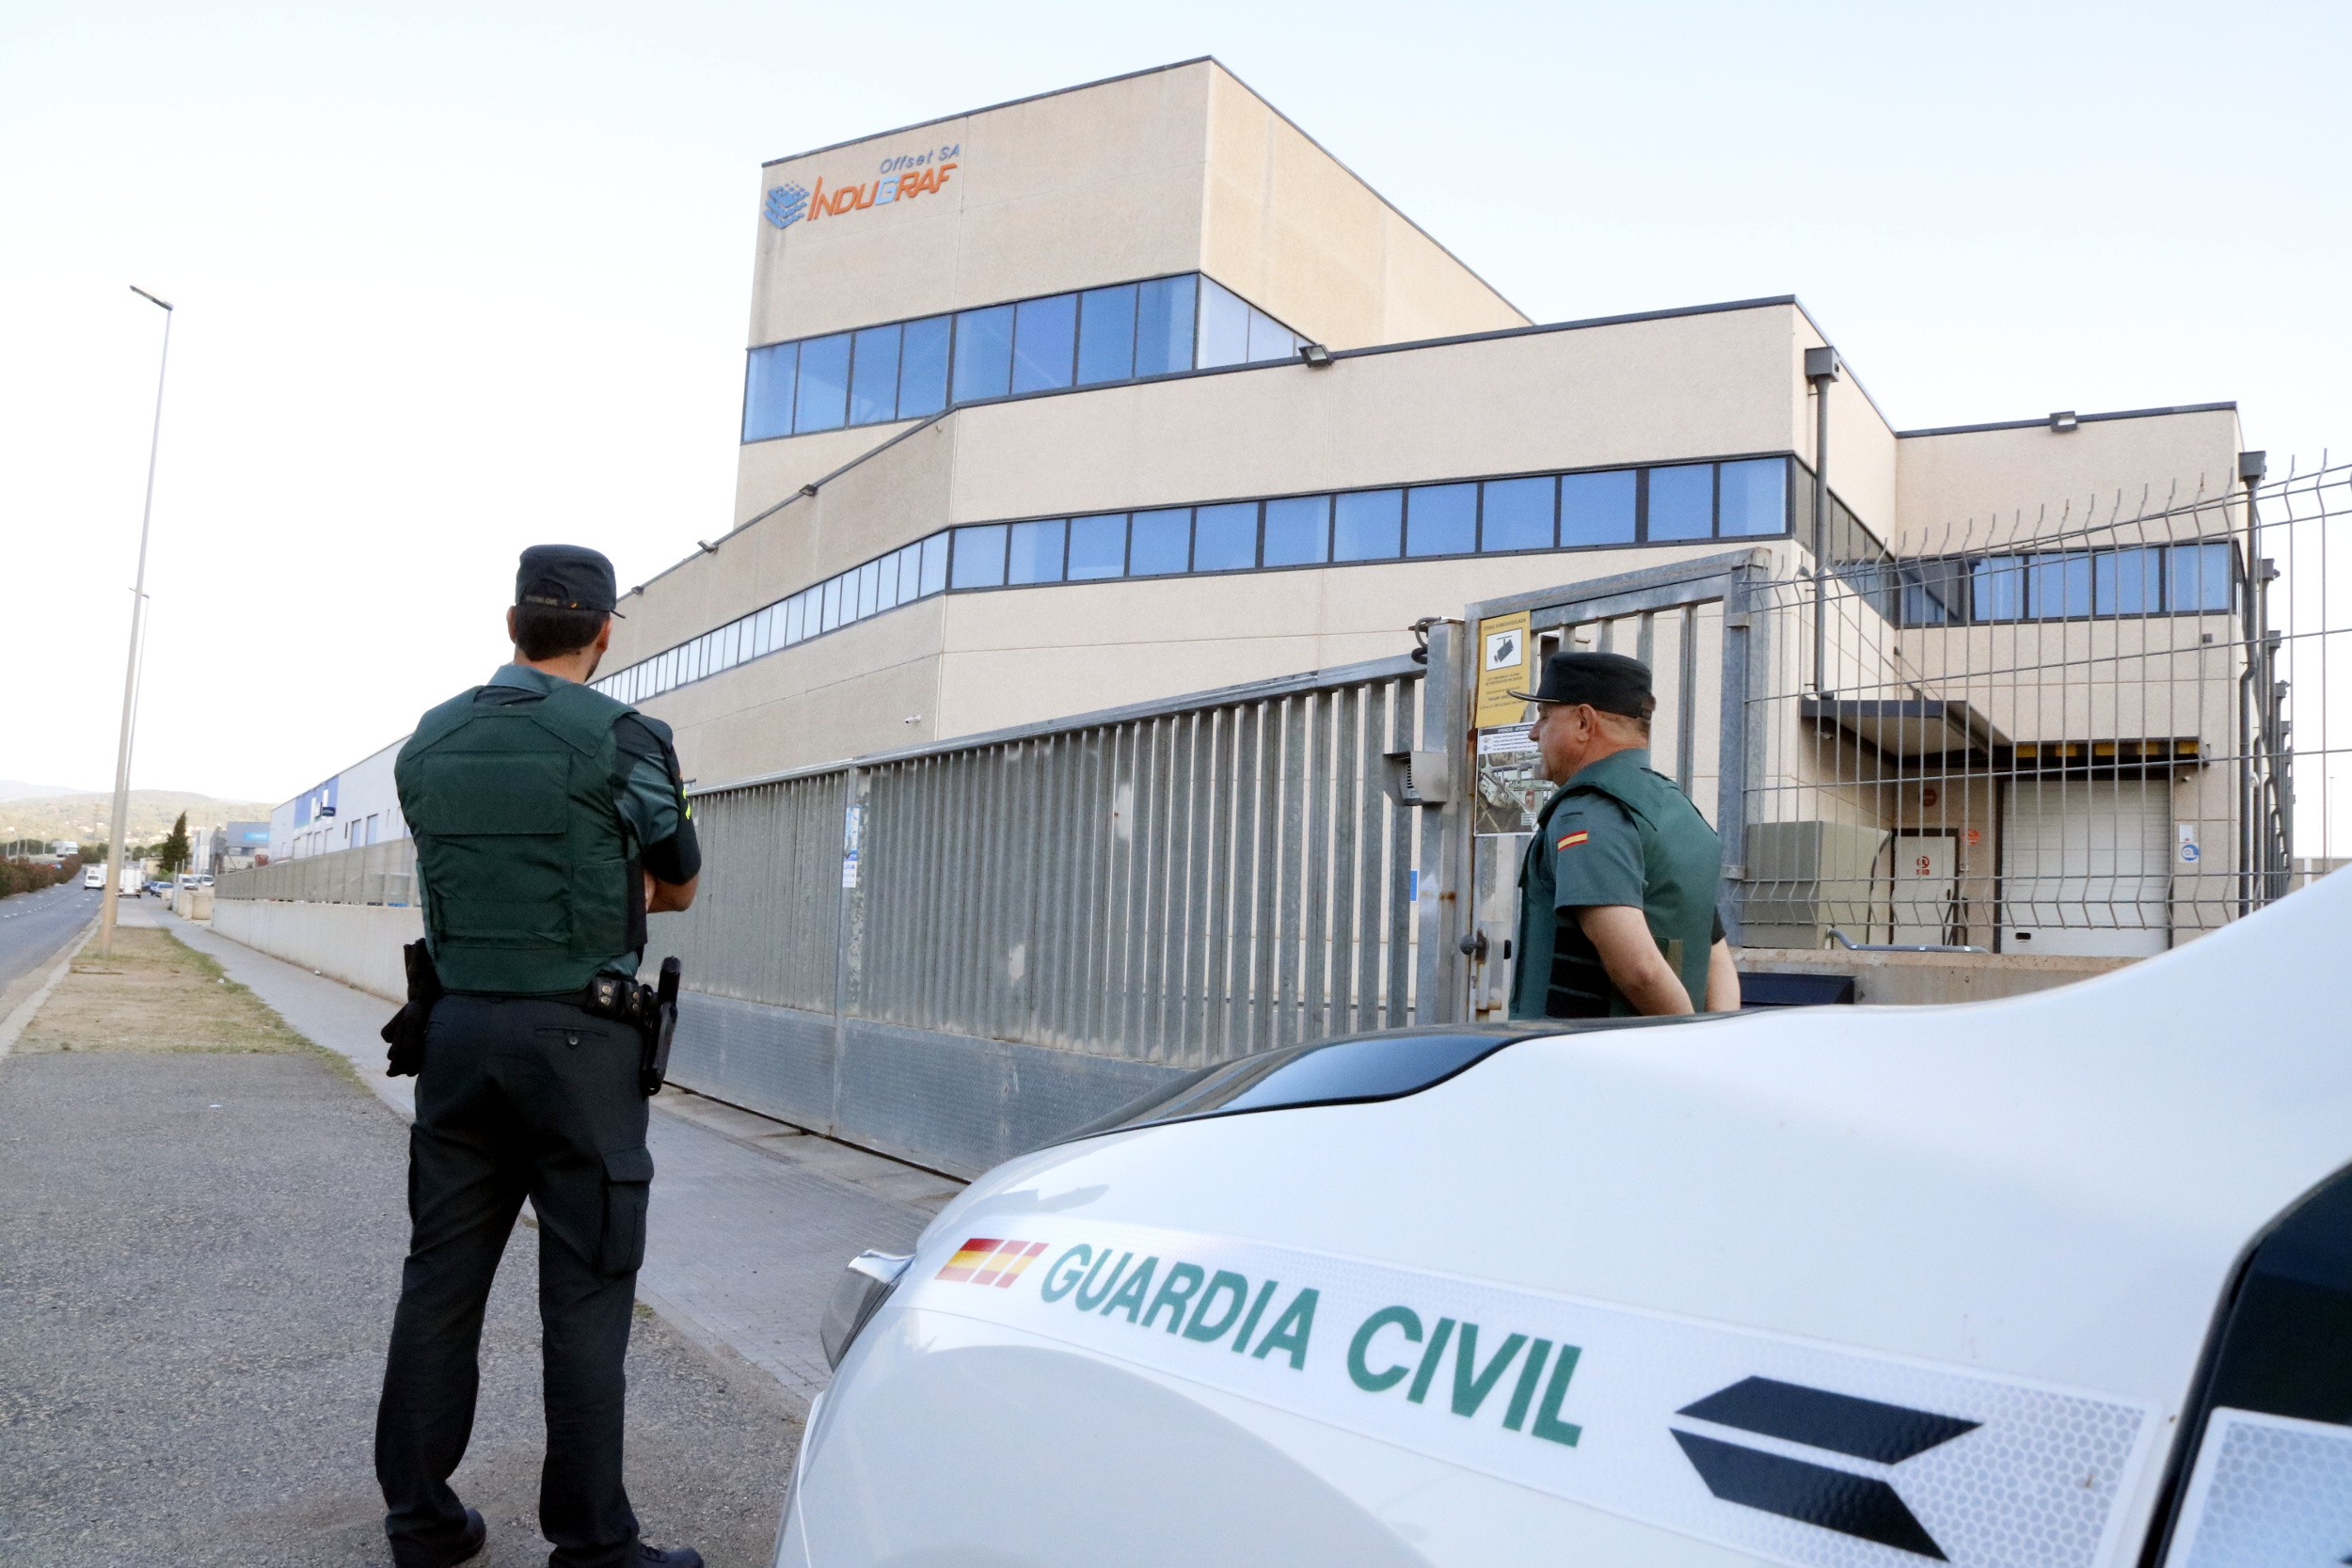 Spanish Guardia Civil officers waiting in front of a print shop (by ACN)